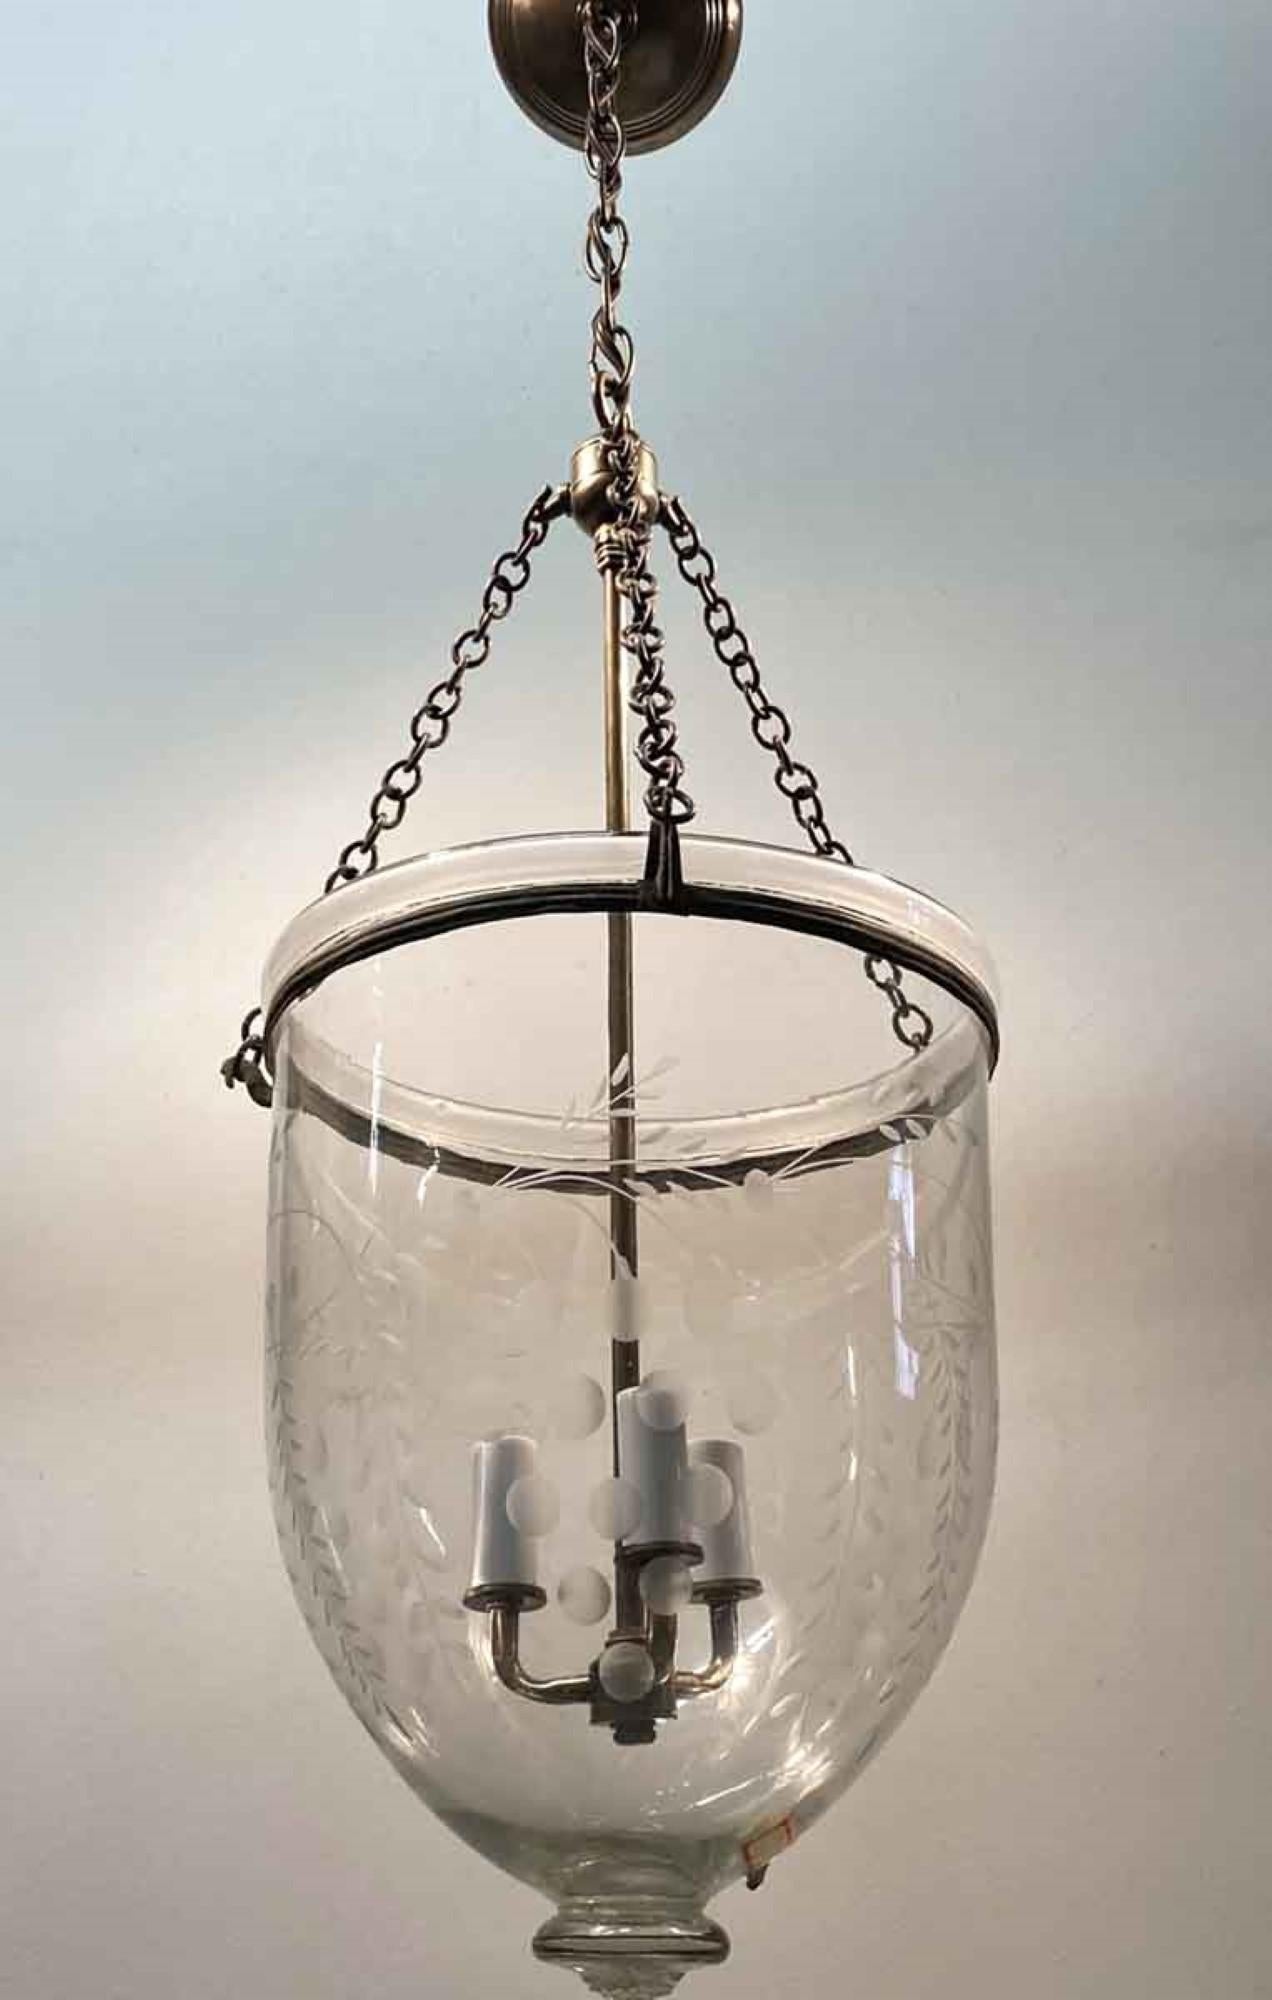 Brass 19th Century Hand Blown English Bell Jar Pendant Lantern with Etched Vines